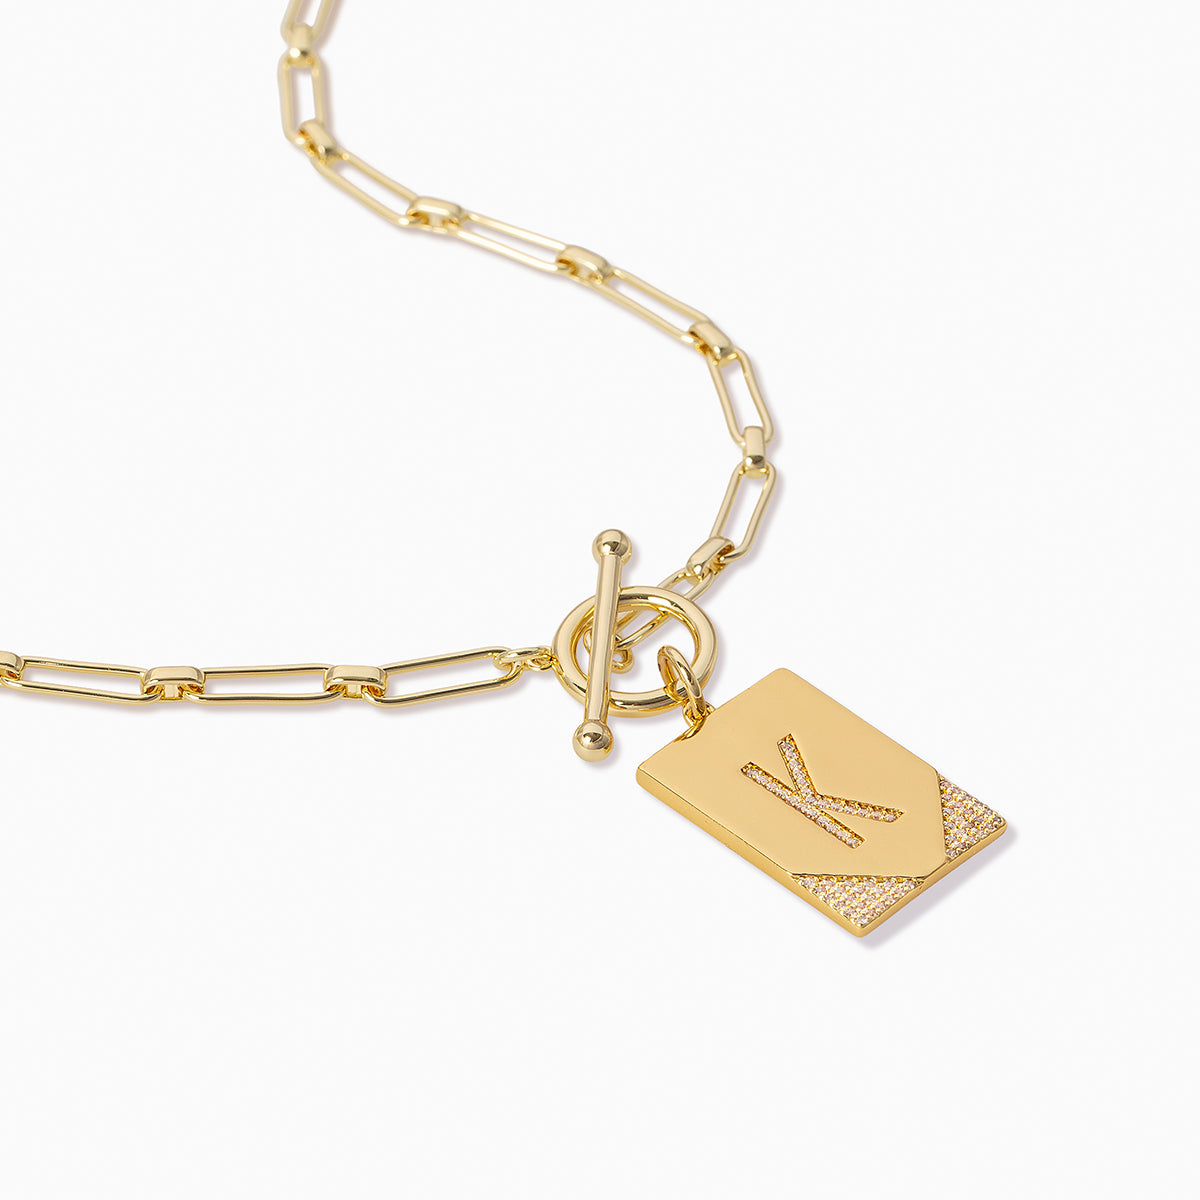 Leave Your Mark Chain Necklace Gold / B